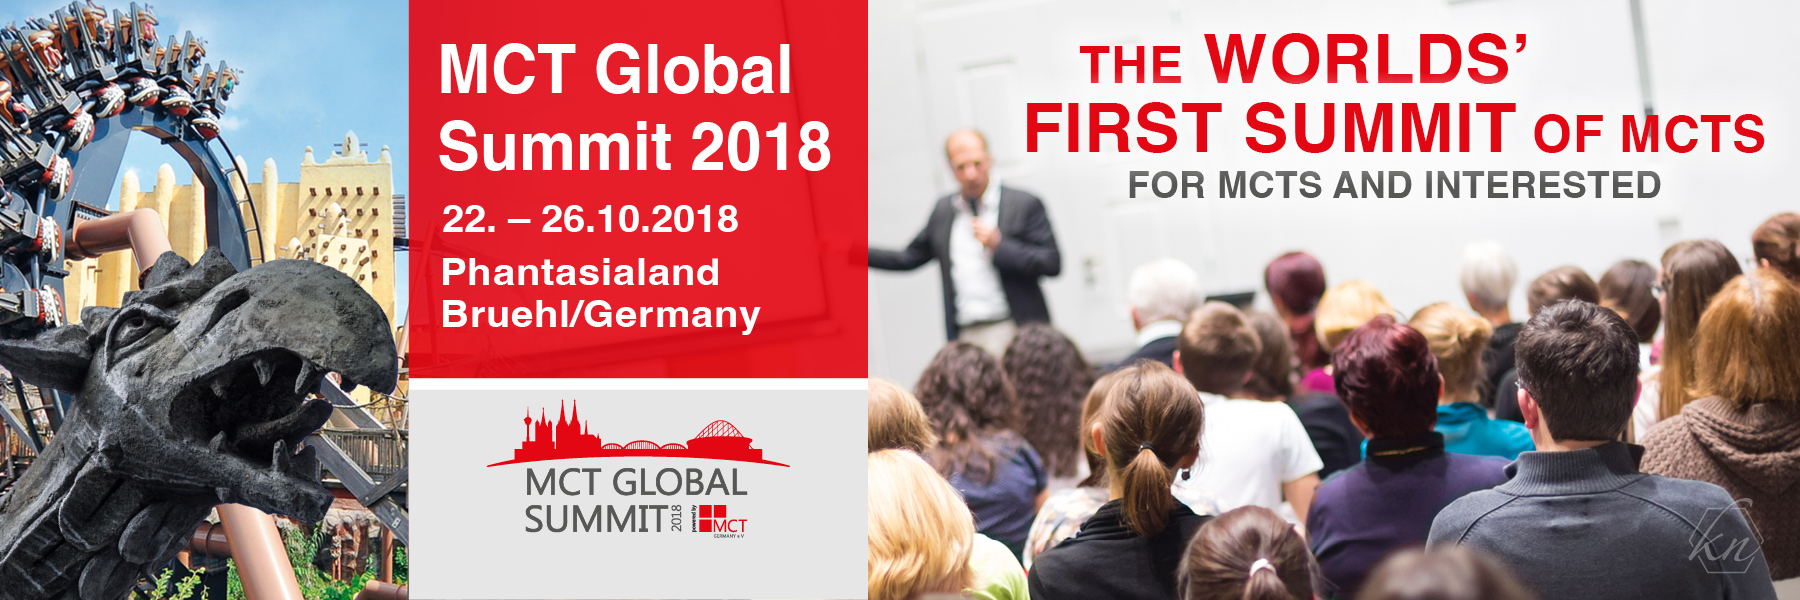 MCT Global Summit 2018. The worlds’ first summit of MCTs for MCTs and interested